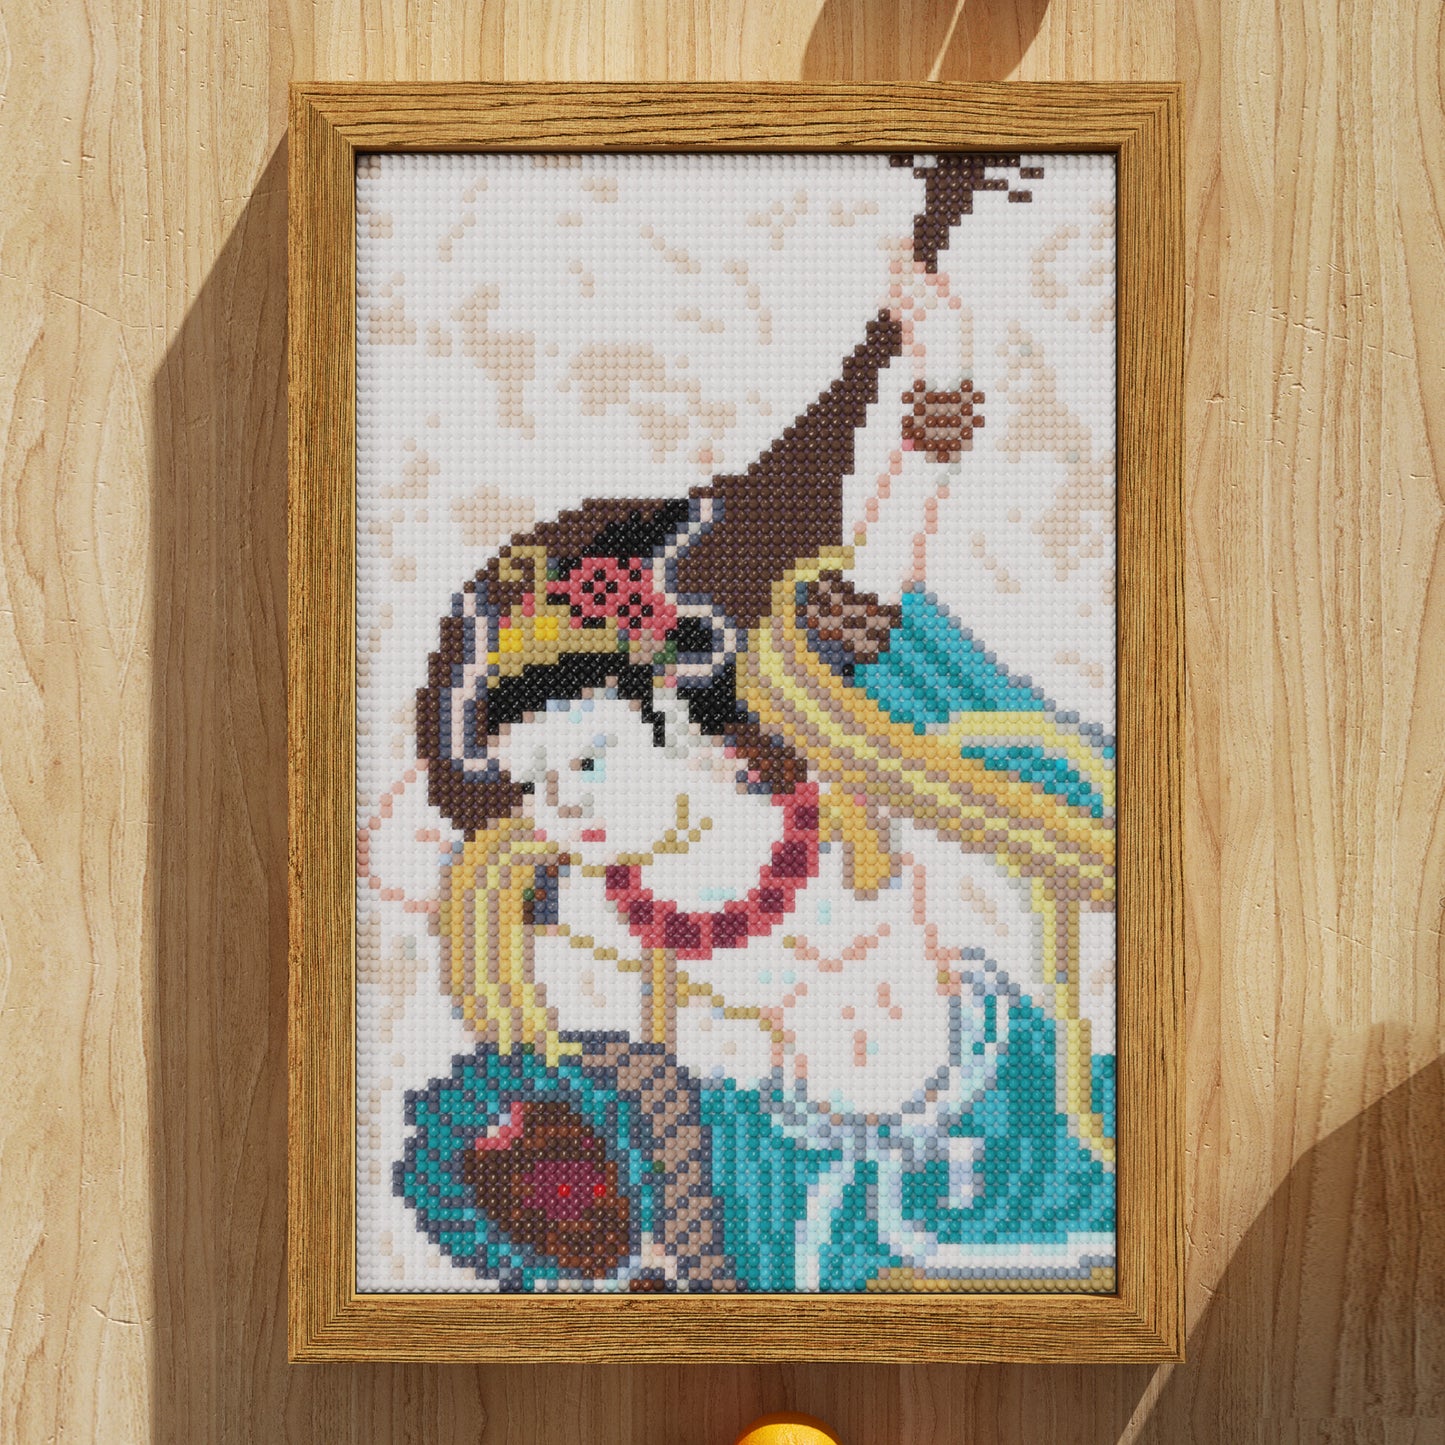 Pipa Player Turning Back, Representing Reverse Thinking in Chinese Classical Painting Theme Diamond Painting, 64*96 Dots, 26 Faces ABS Diamond, Elegant Solid Wood Frame